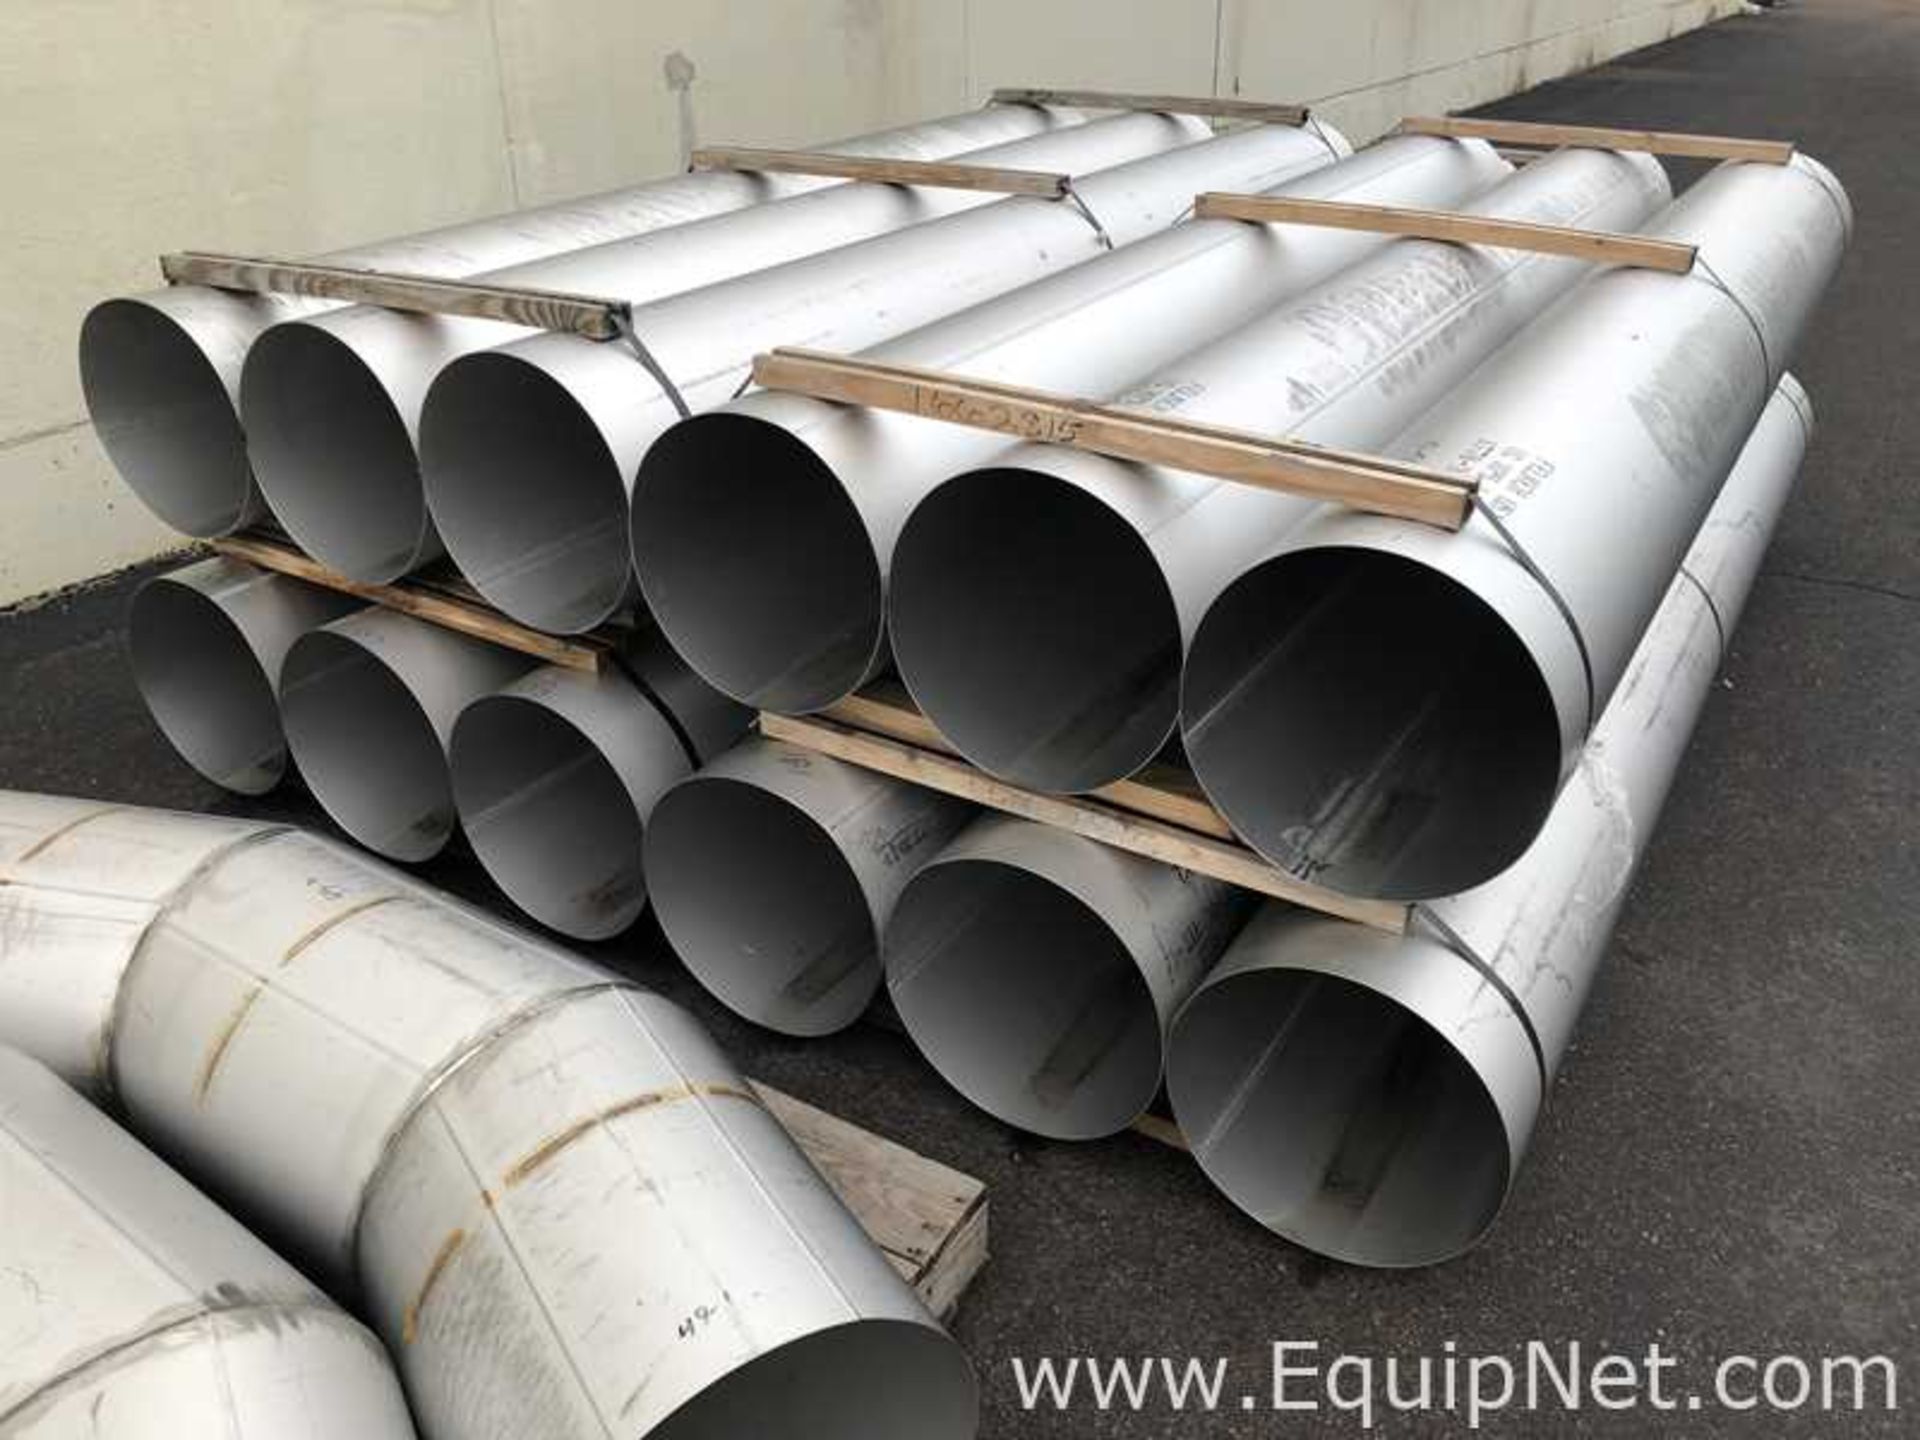 Lot Of Approx 15 Stainless Steel 304L Piping 16in diam X 150in Length Sections And Semi Elbows - Image 8 of 12